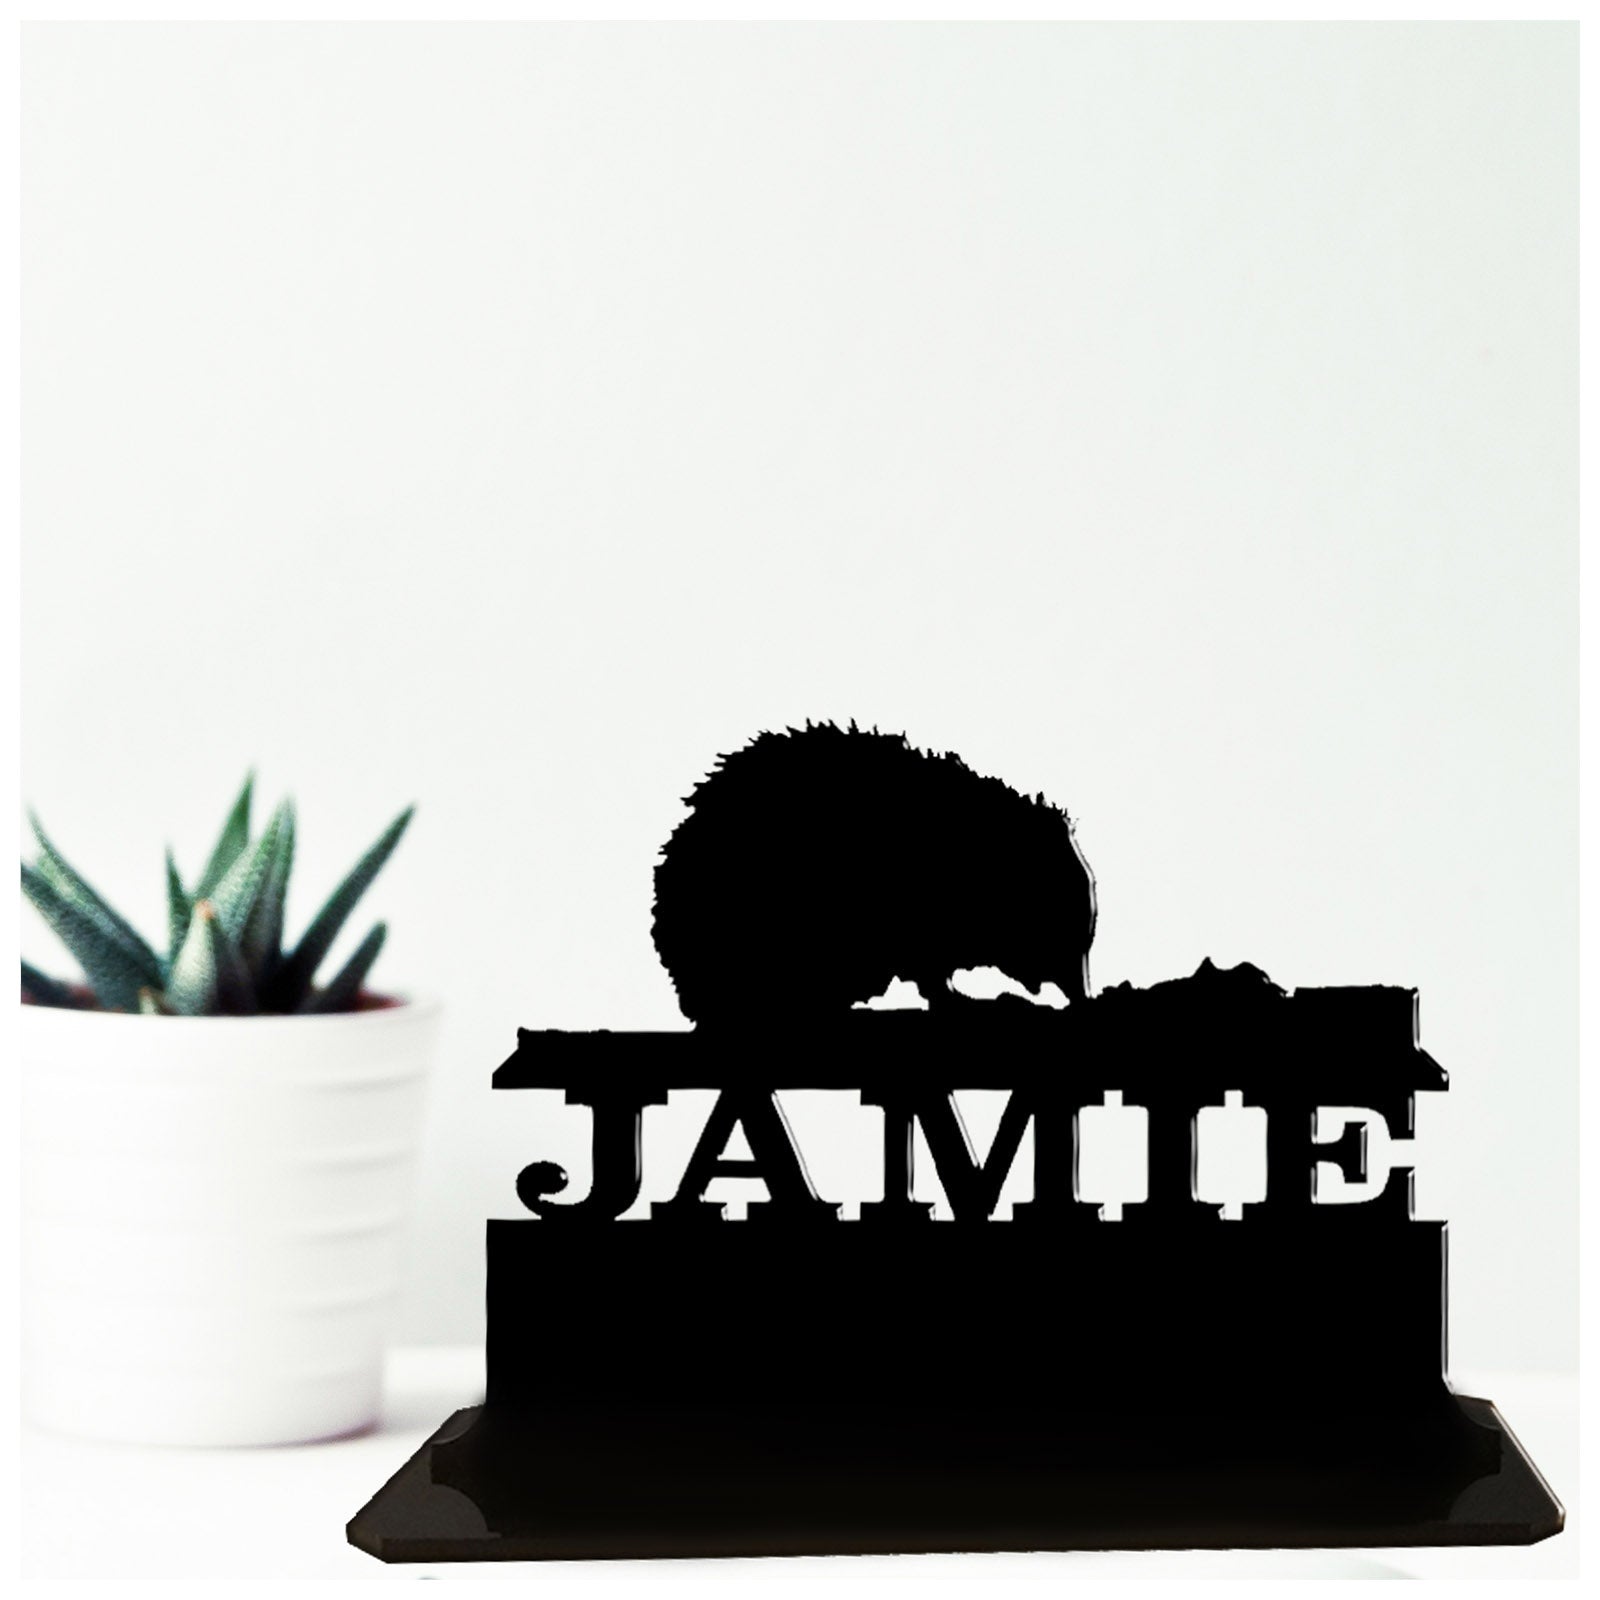 Acrylic personalized hedgehog themed gift ideas for hedgehog lovers. Standalone keepsake ornaments.